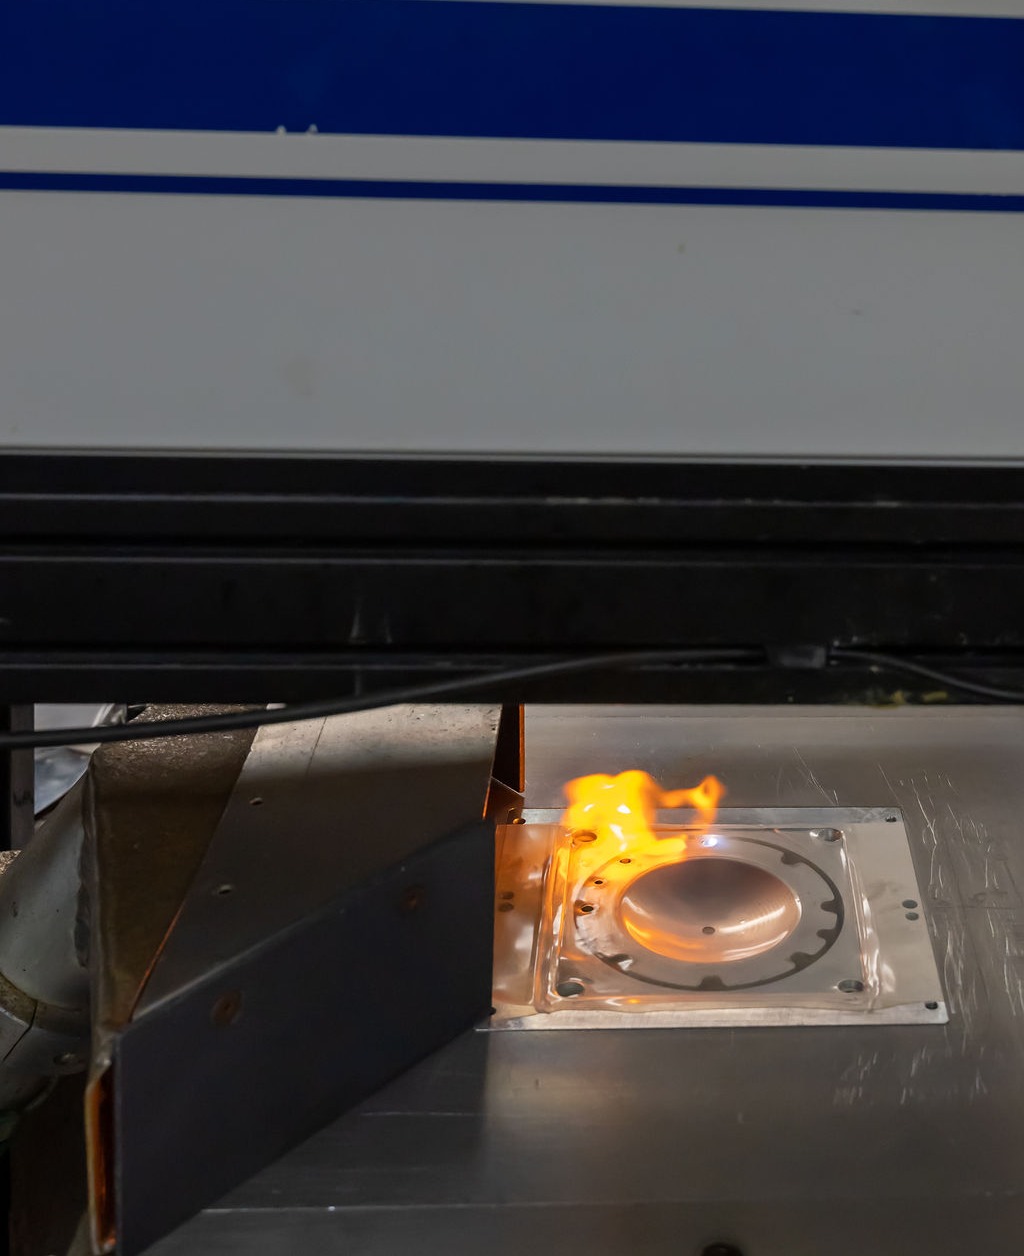 Close up of laser trimmer finely cutting a thermoformed tool. Fire can be see from the heat